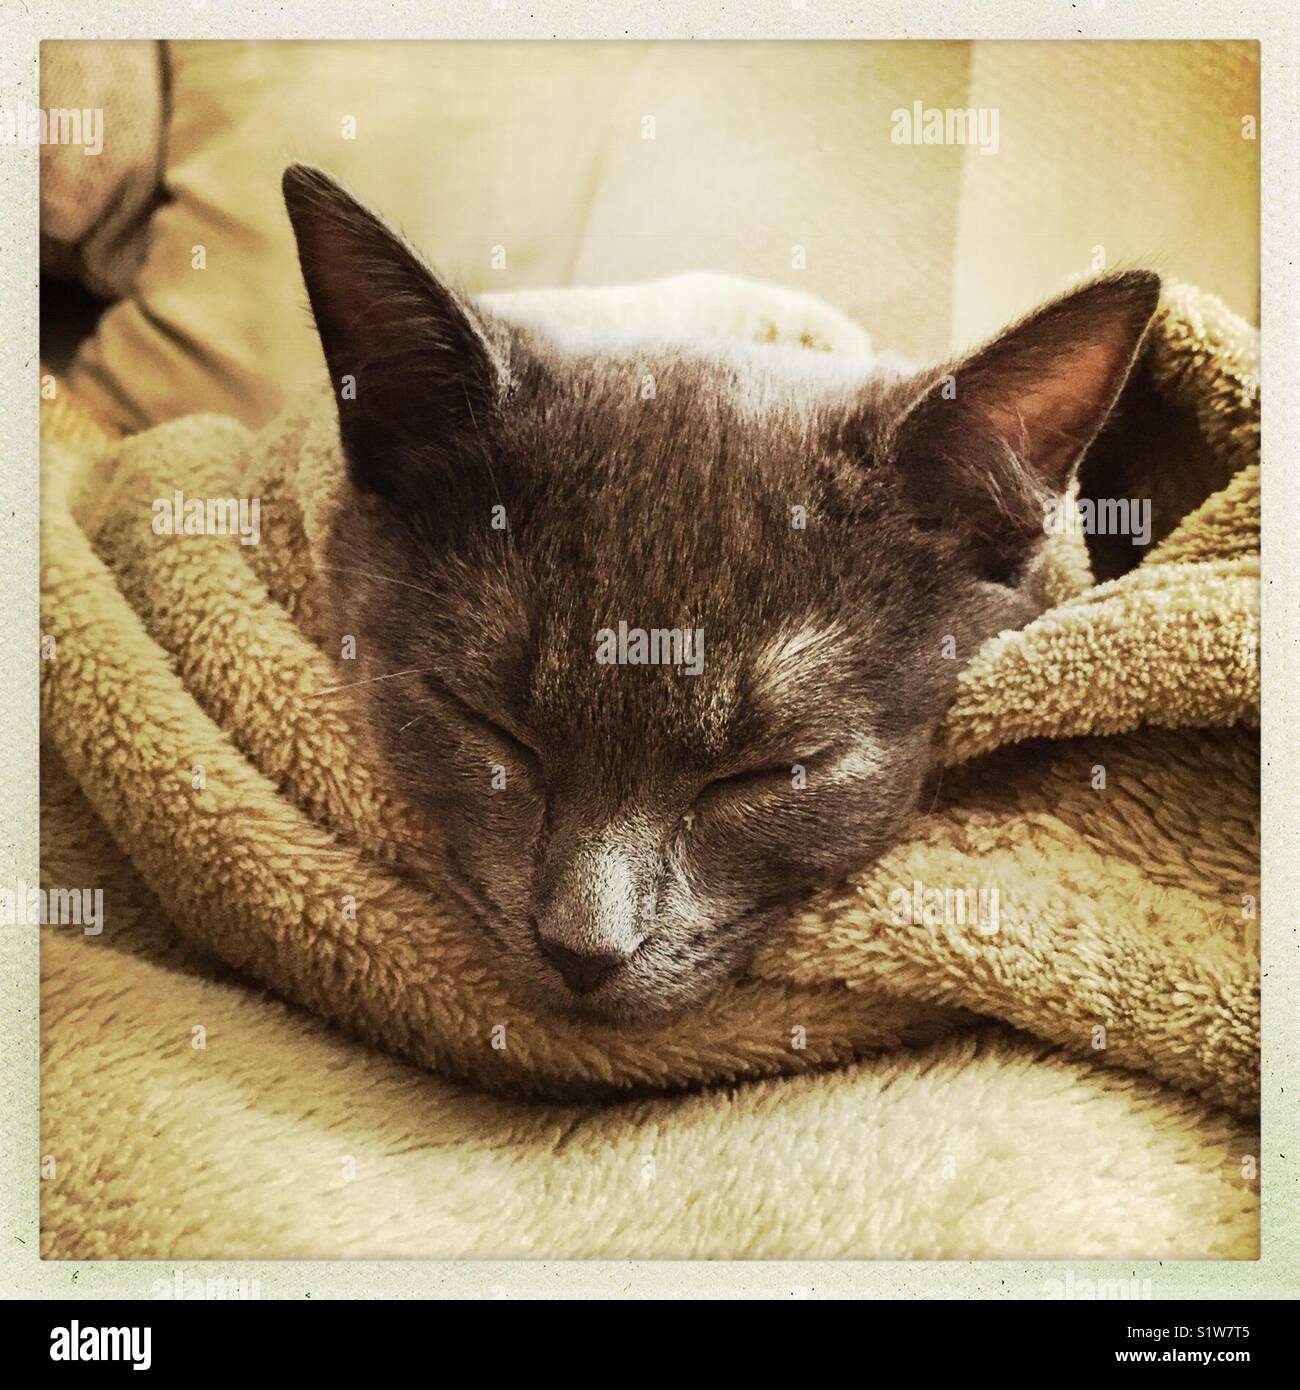 Sleeping Kitty cat in a soft blanket Stock Photo